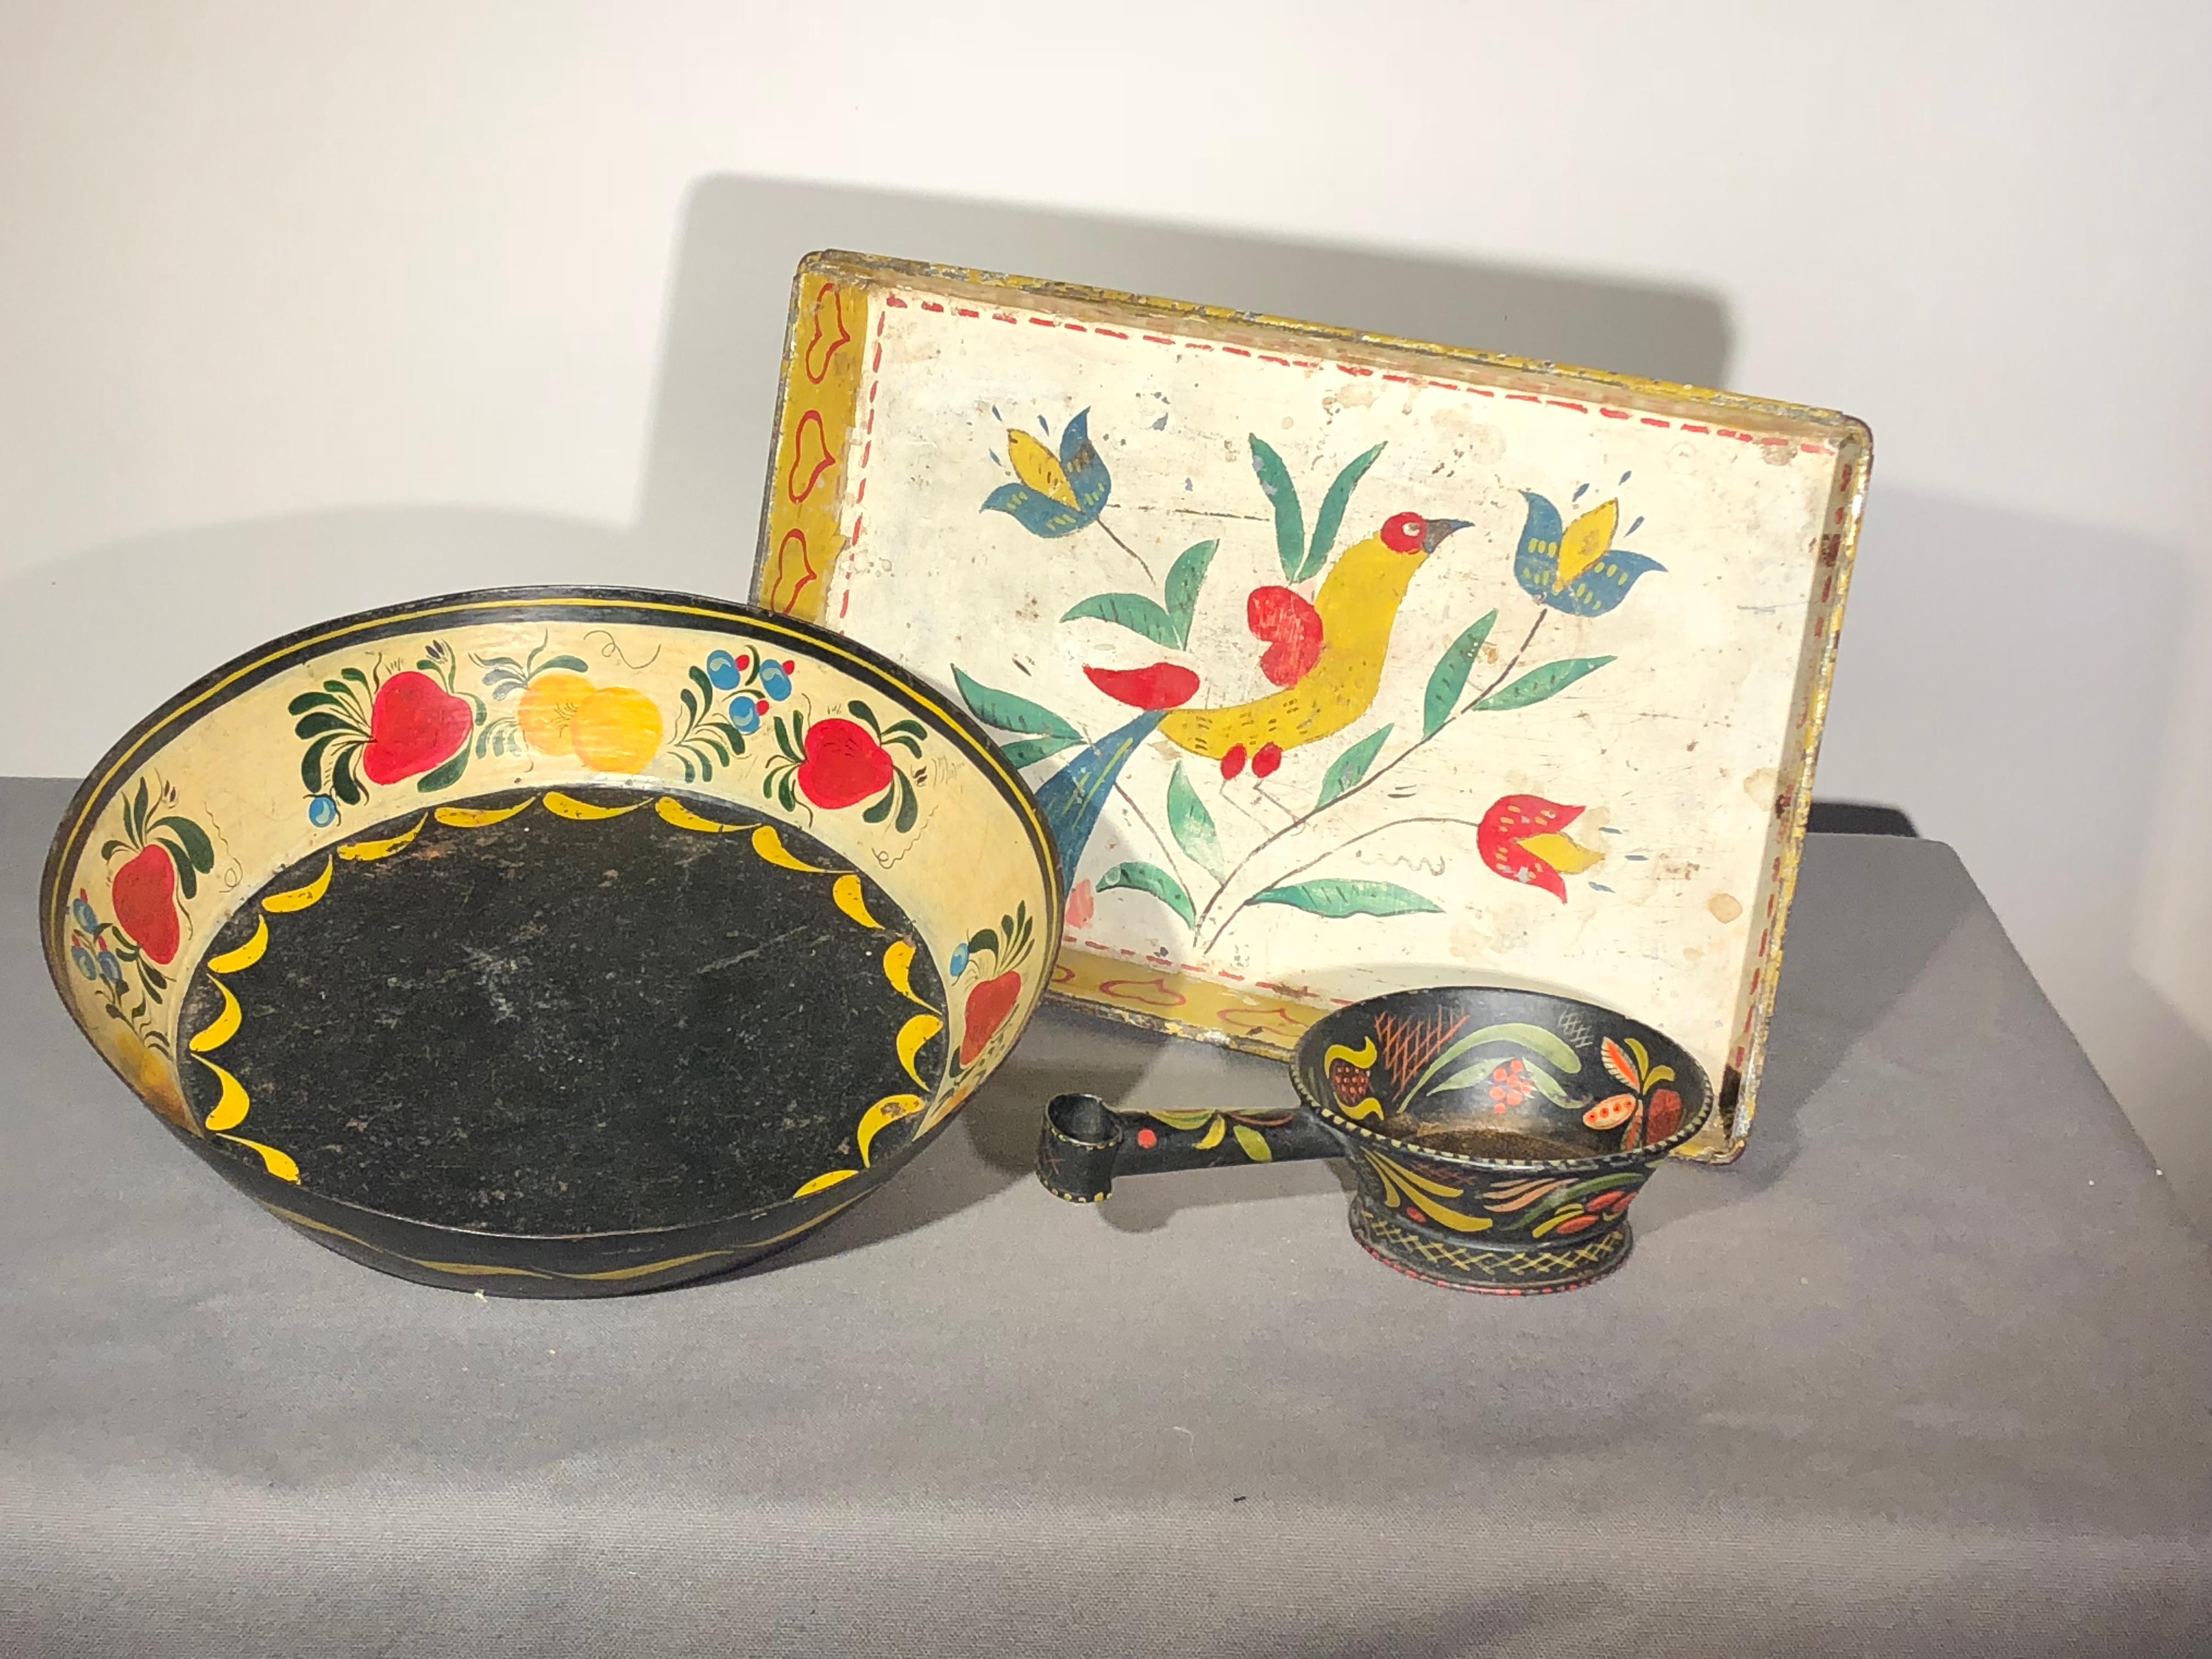 A group of 3 toleware articles including a rectangular tray decorated with birds and flowers, a circular tray in black ground with painted fruits and garlands, and a small tea strainer in black ground with painted leaves and flowers
European and